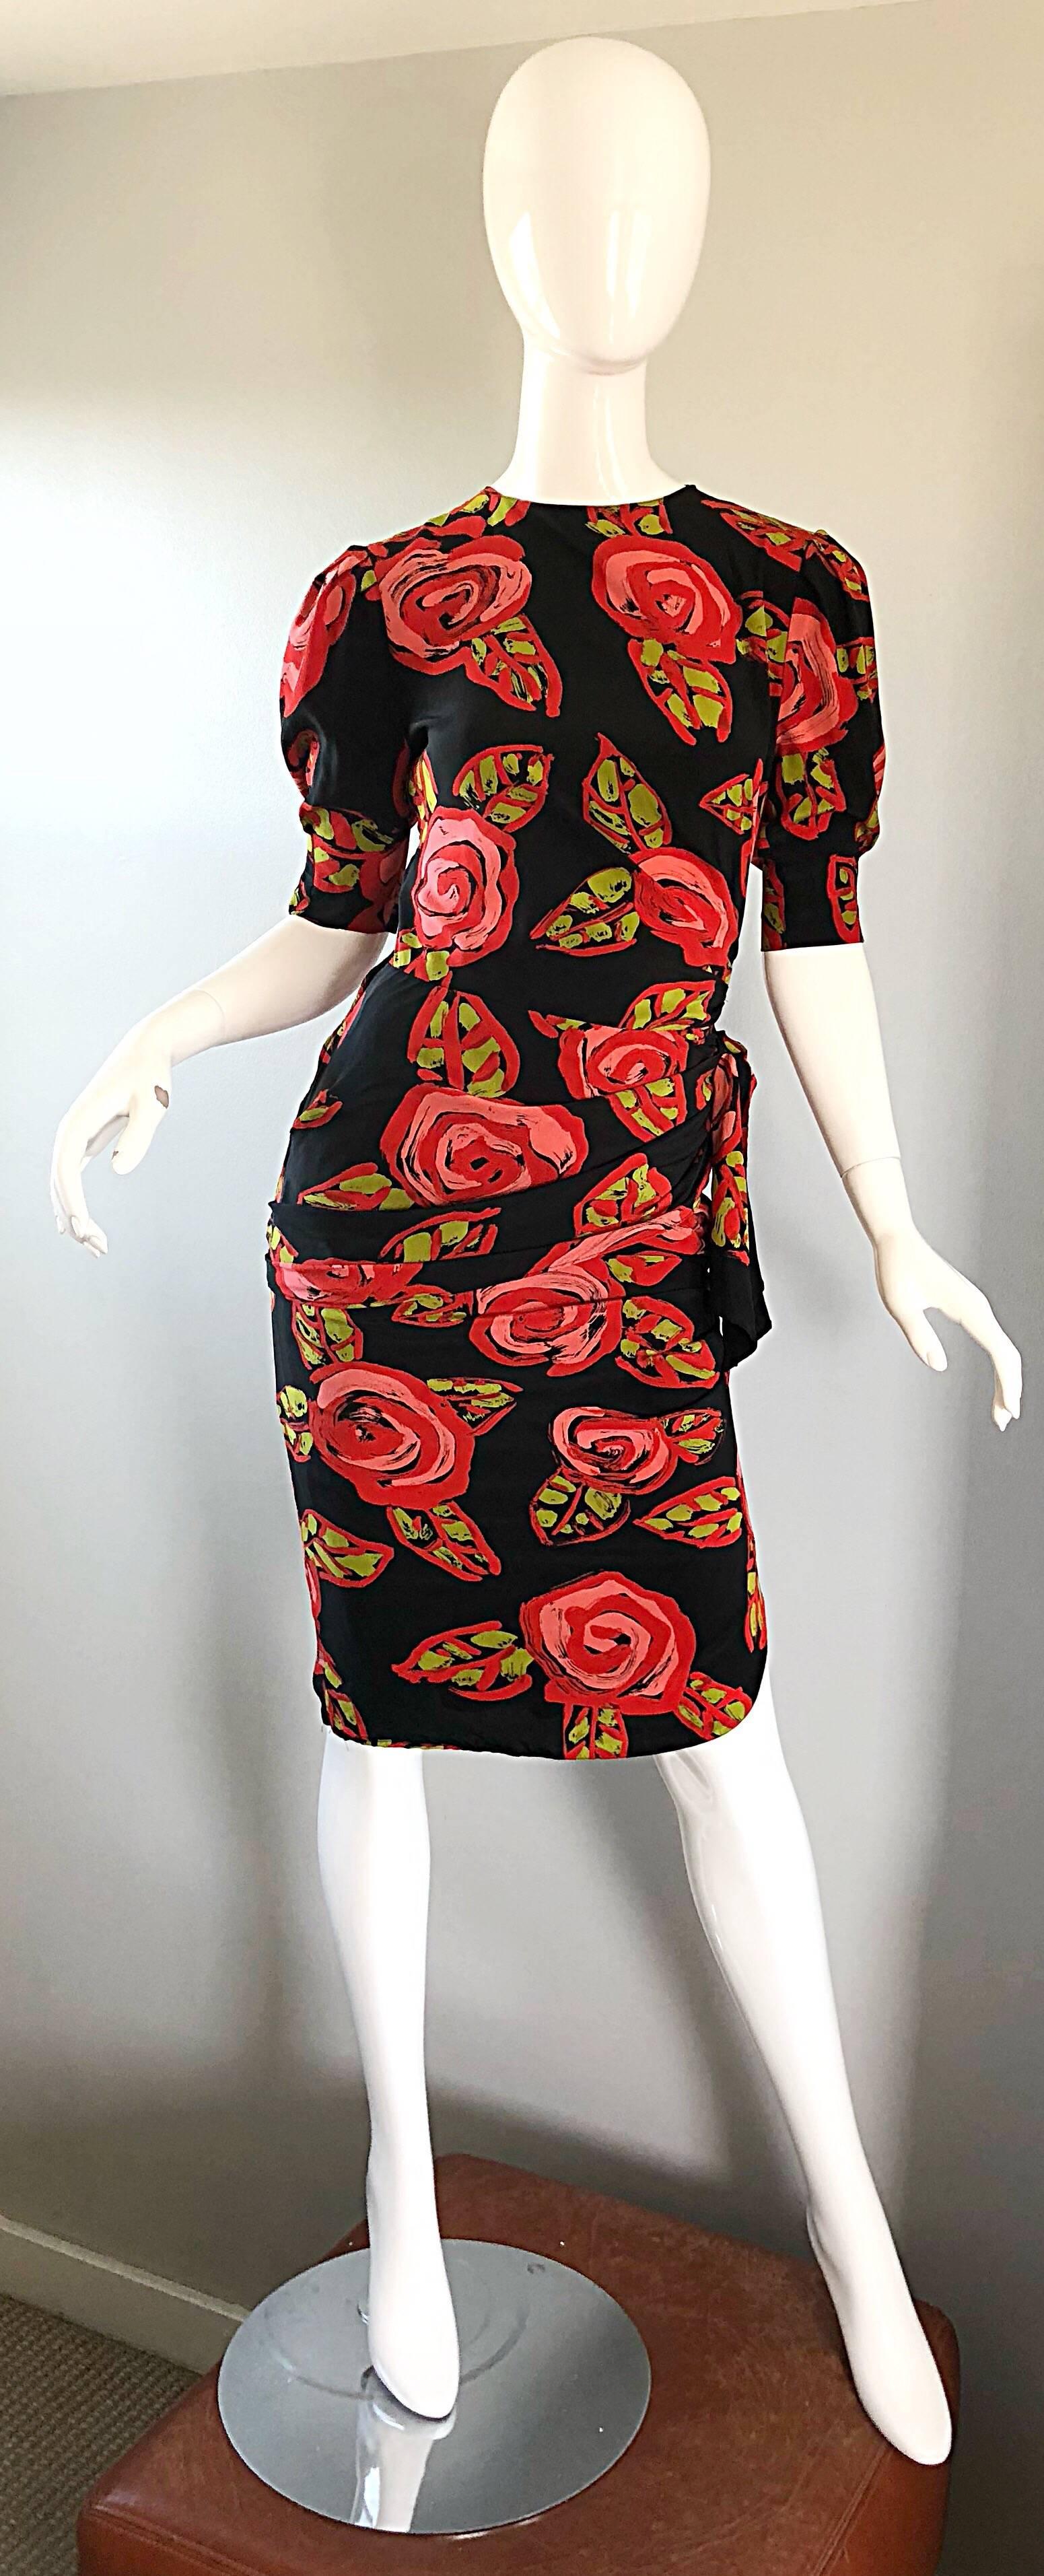 Beautiful vintage LOUIS FERAUD abstract rose print silk dress! Features an Avant Garde rose print on luxurious soft Italian silk. Flattering gathers at waist and hips hide any 'problem' areas. Fitted bodice has some stretch. Hidden zipper up both